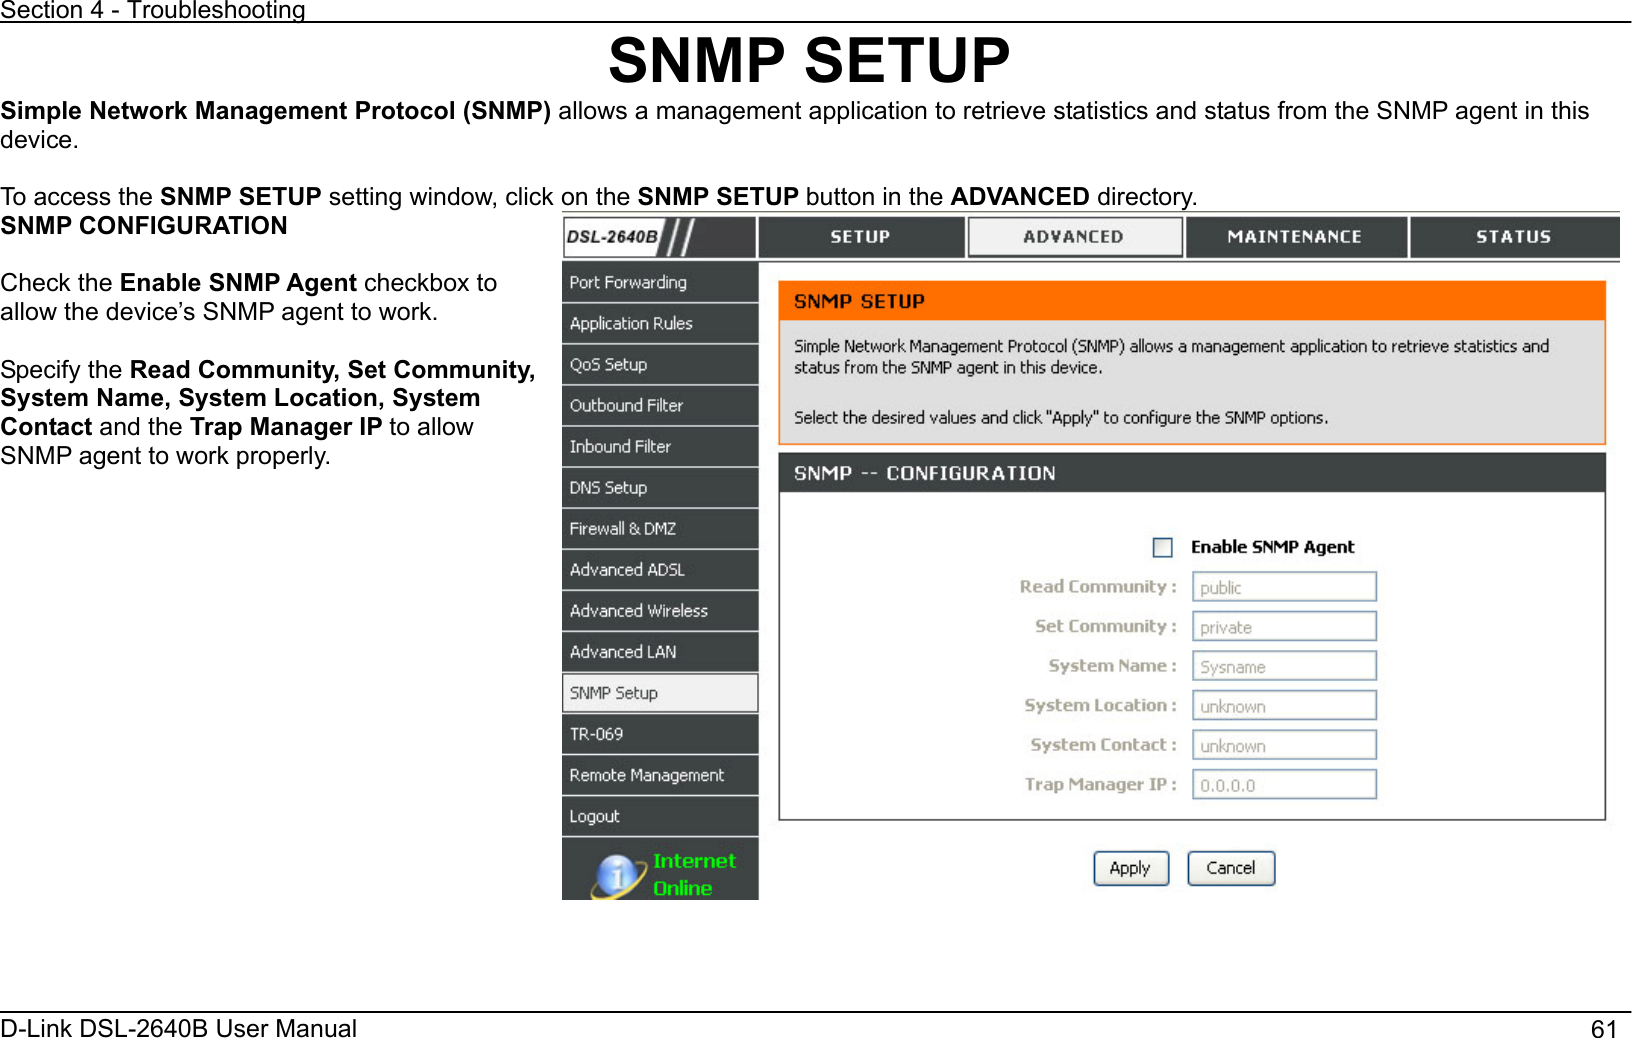 Section 4 - Troubleshooting D-Link DSL-2640B User Manual                                       61SNMP SETUP Simple Network Management Protocol (SNMP) allows a management application to retrieve statistics and status from the SNMP agent in this device.To access the SNMP SETUP setting window, click on the SNMP SETUP button in the ADVANCED directory. SNMP CONFIGURATION Check the Enable SNMP Agent checkbox to allow the device’s SNMP agent to work. Specify the Read Community, Set Community, System Name, System Location, System Contact and the Trap Manager IP to allow SNMP agent to work properly. 